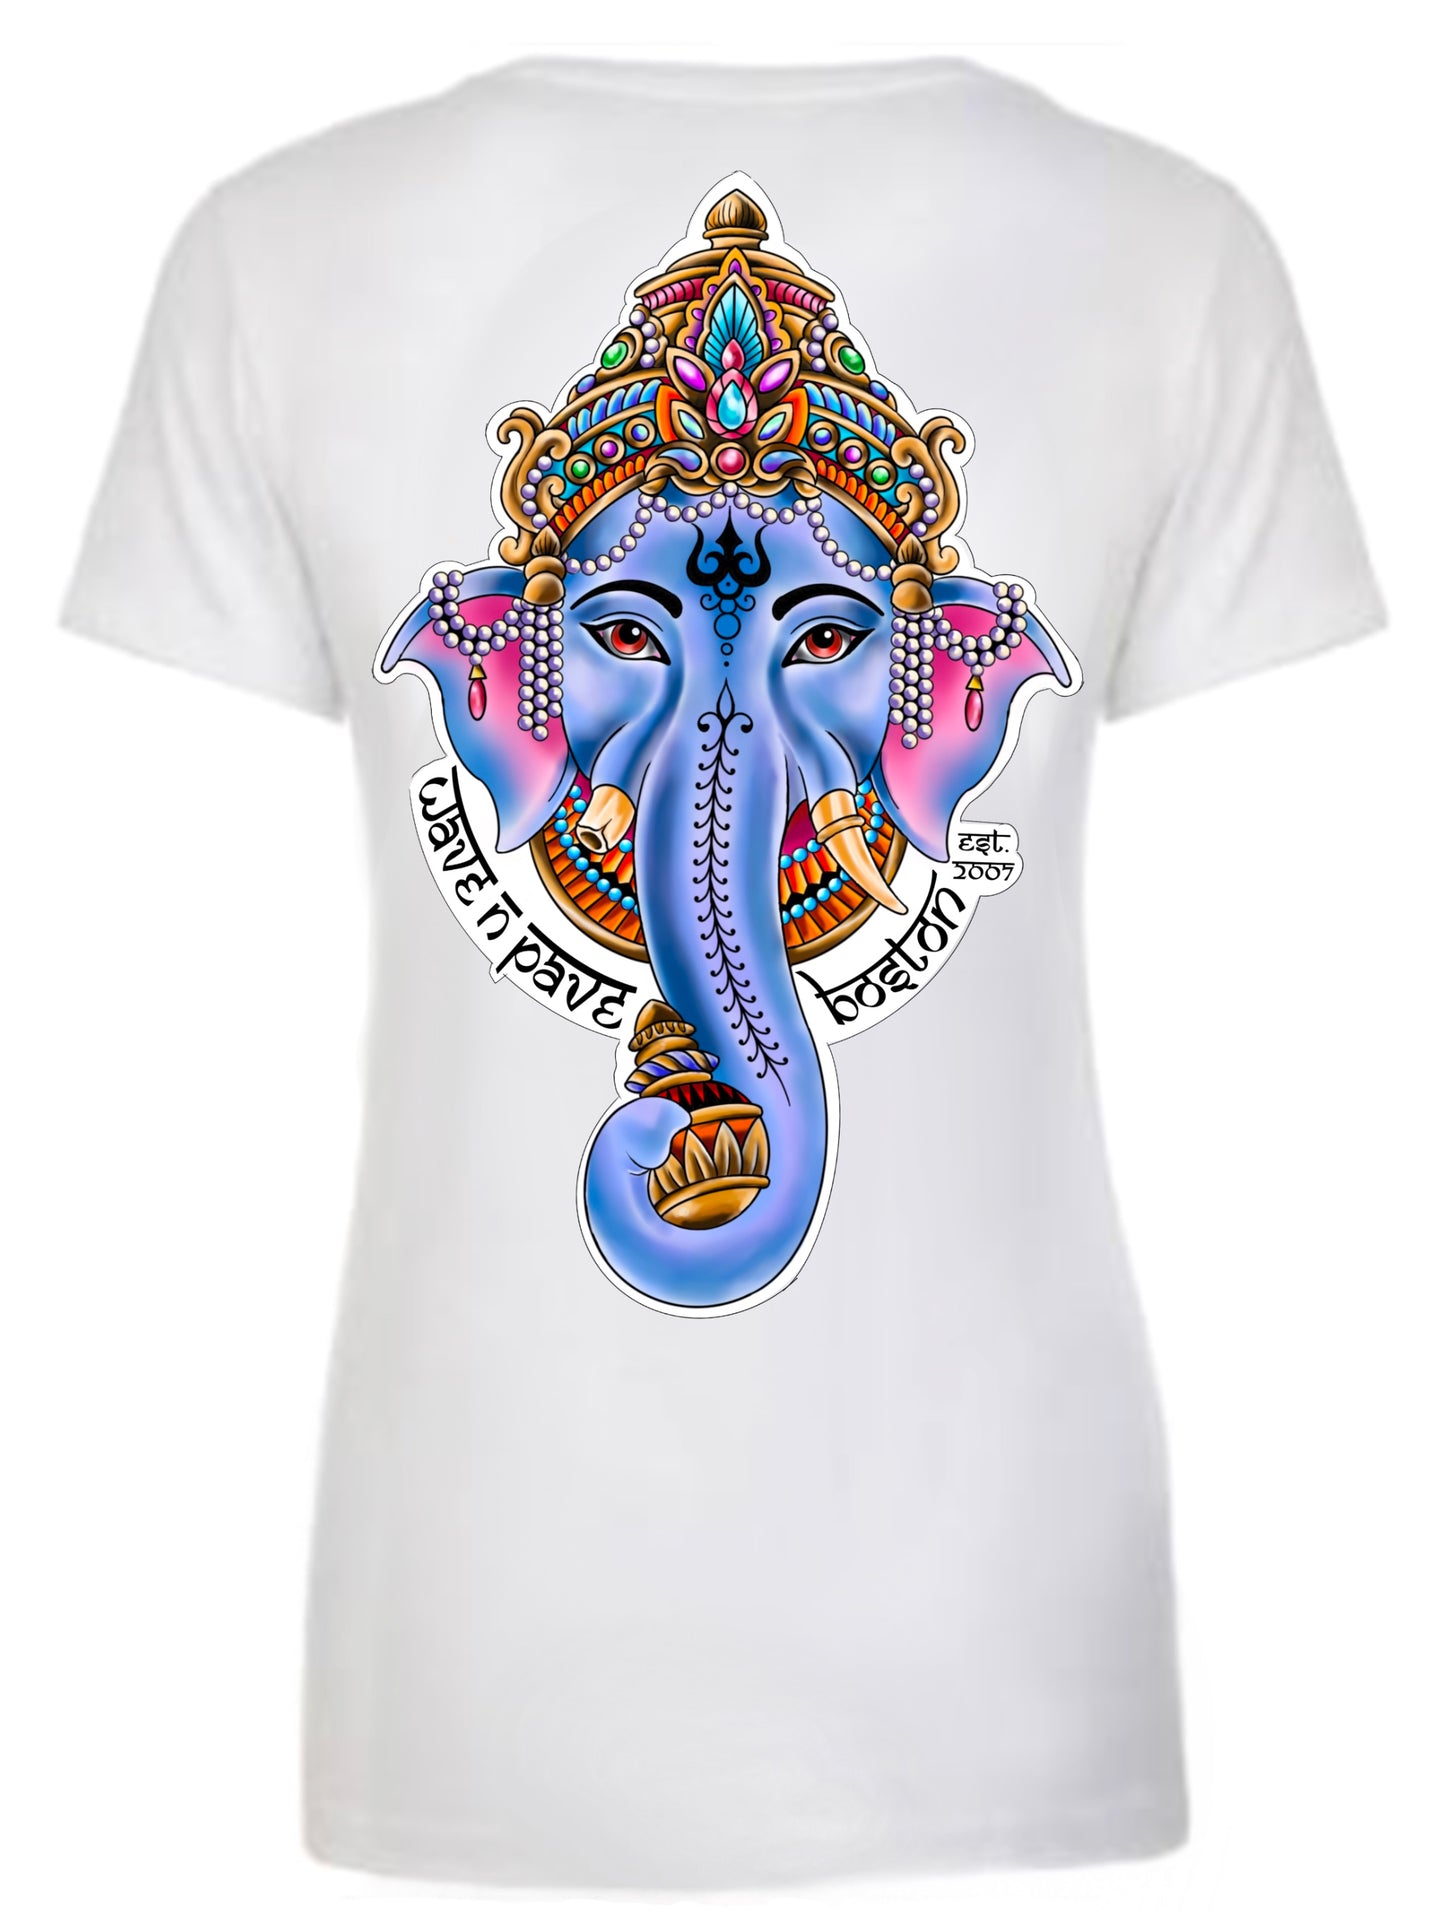 Ganesha Womans Fitted V-Neck Tee Shirt